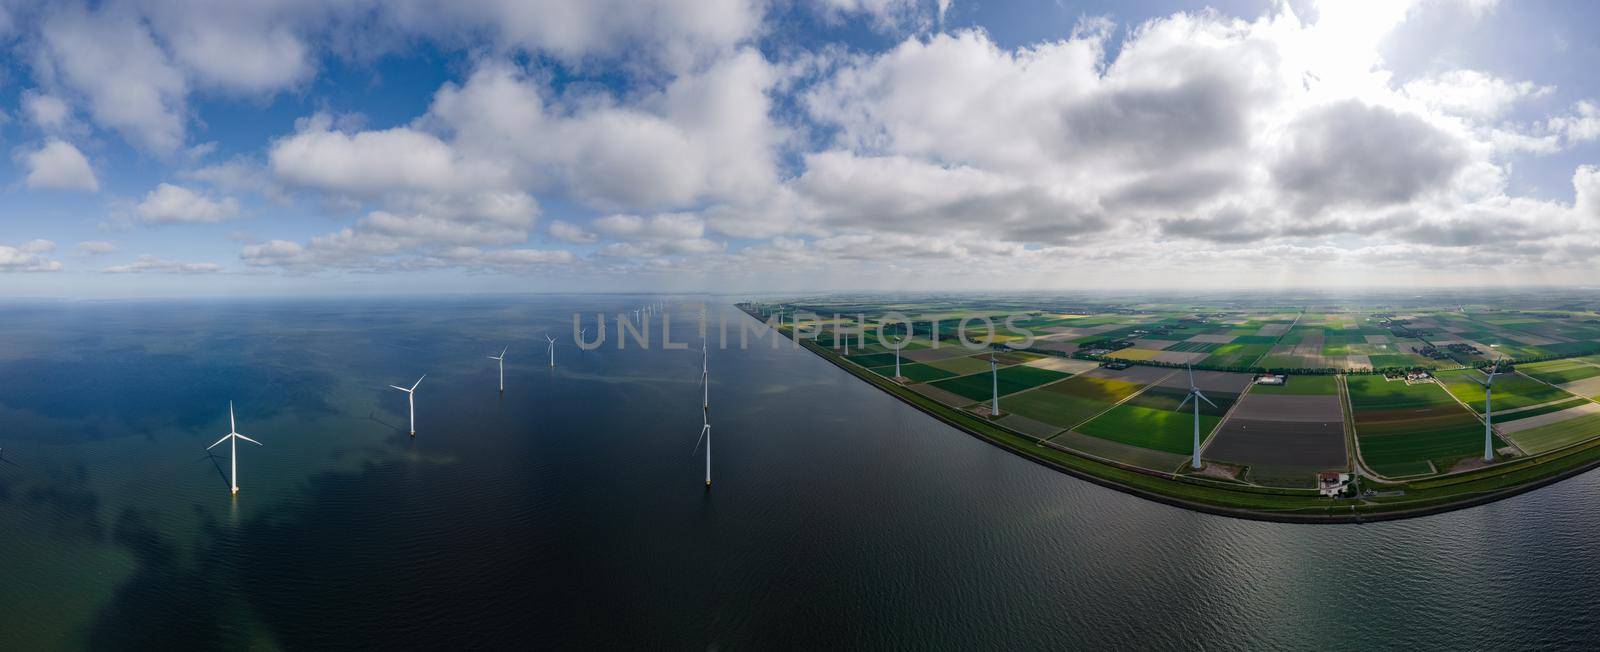 offshore windmill park with clouds and a blue sky, windmill park in the ocean drone aerial view with wind turbine Flevoland Netherlands Ijsselmeer by fokkebok